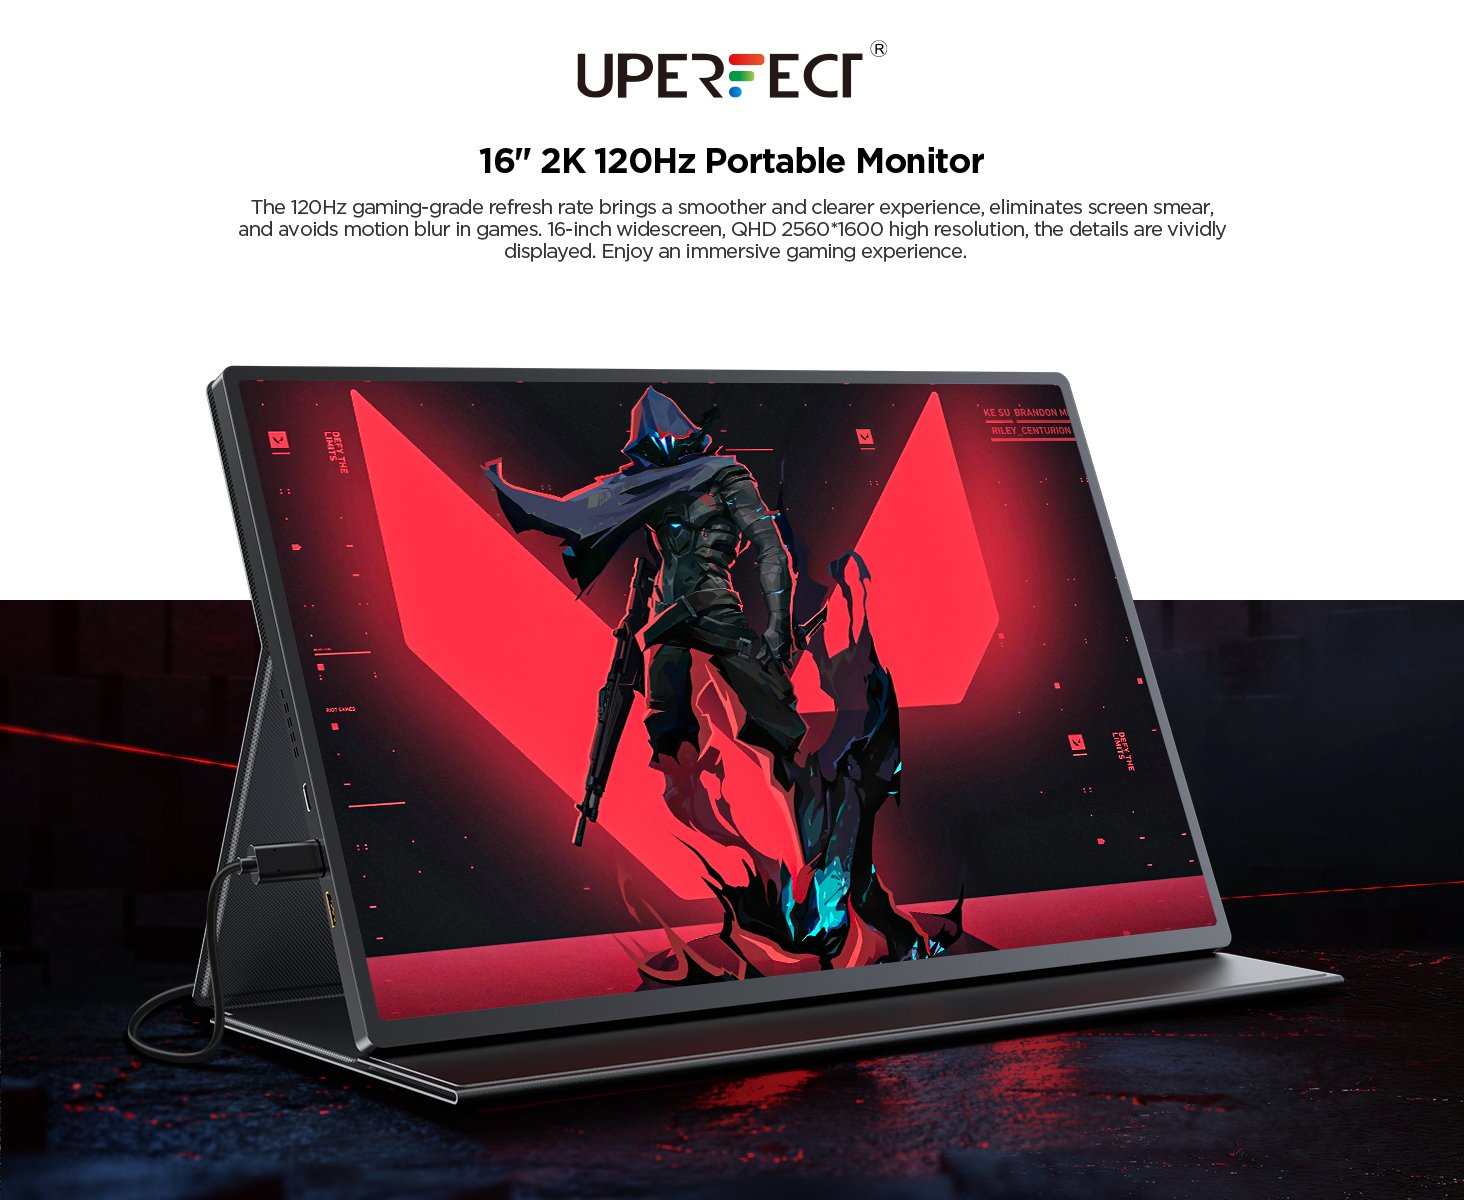 Uperfect Portable Monitor 120hz  Uperfect 2k Portable Monitor